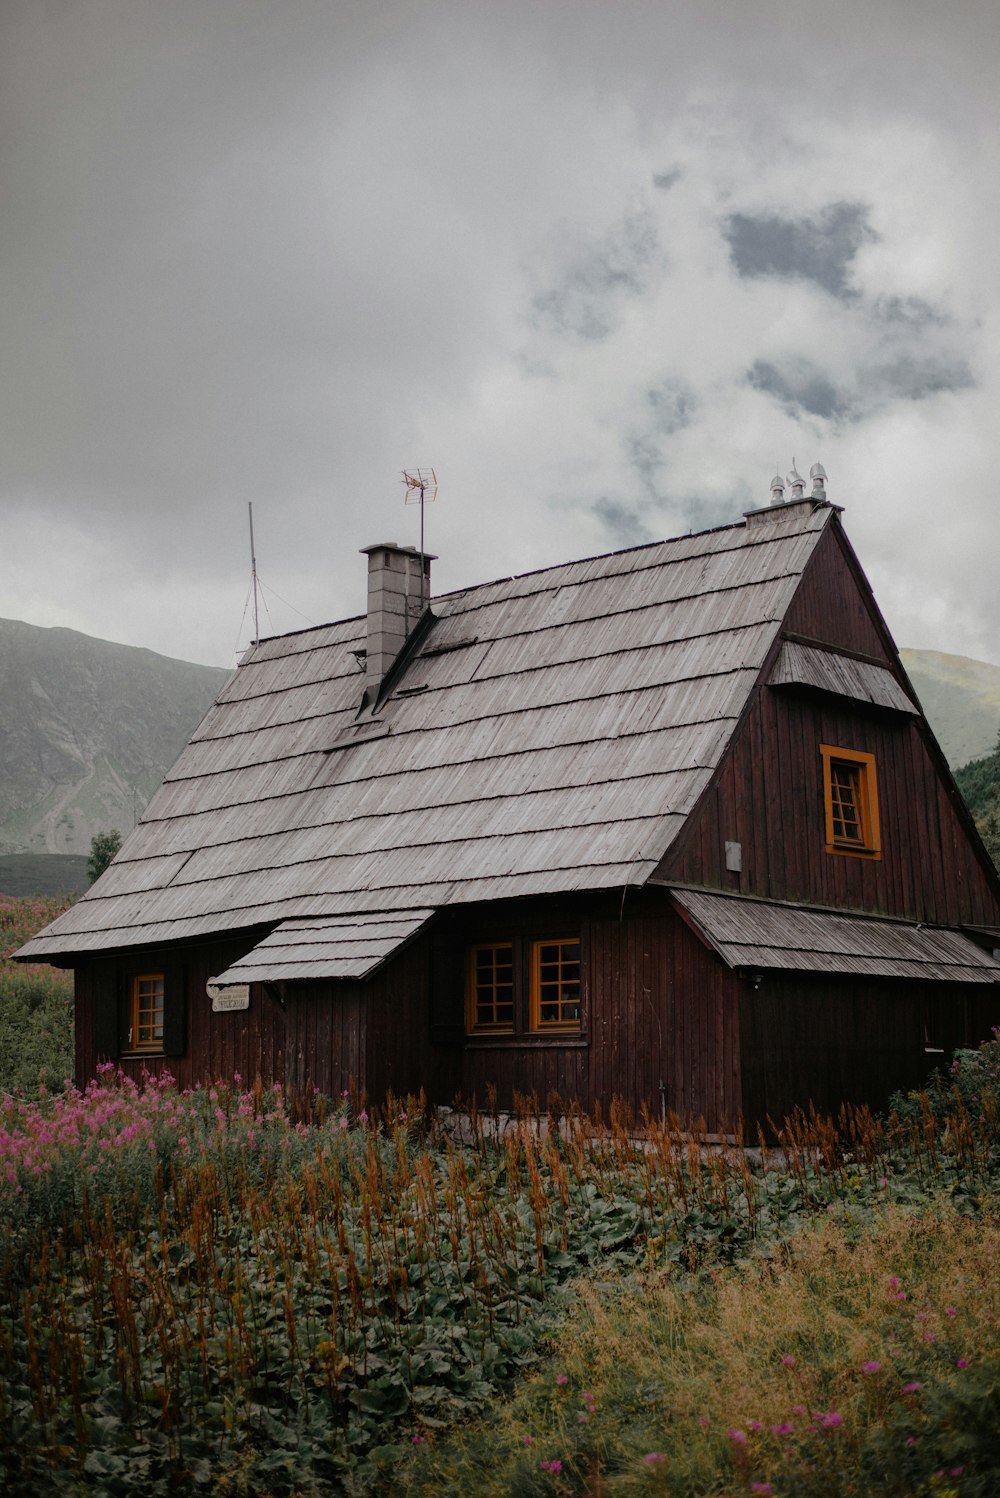 a small wooden house with a metal roof